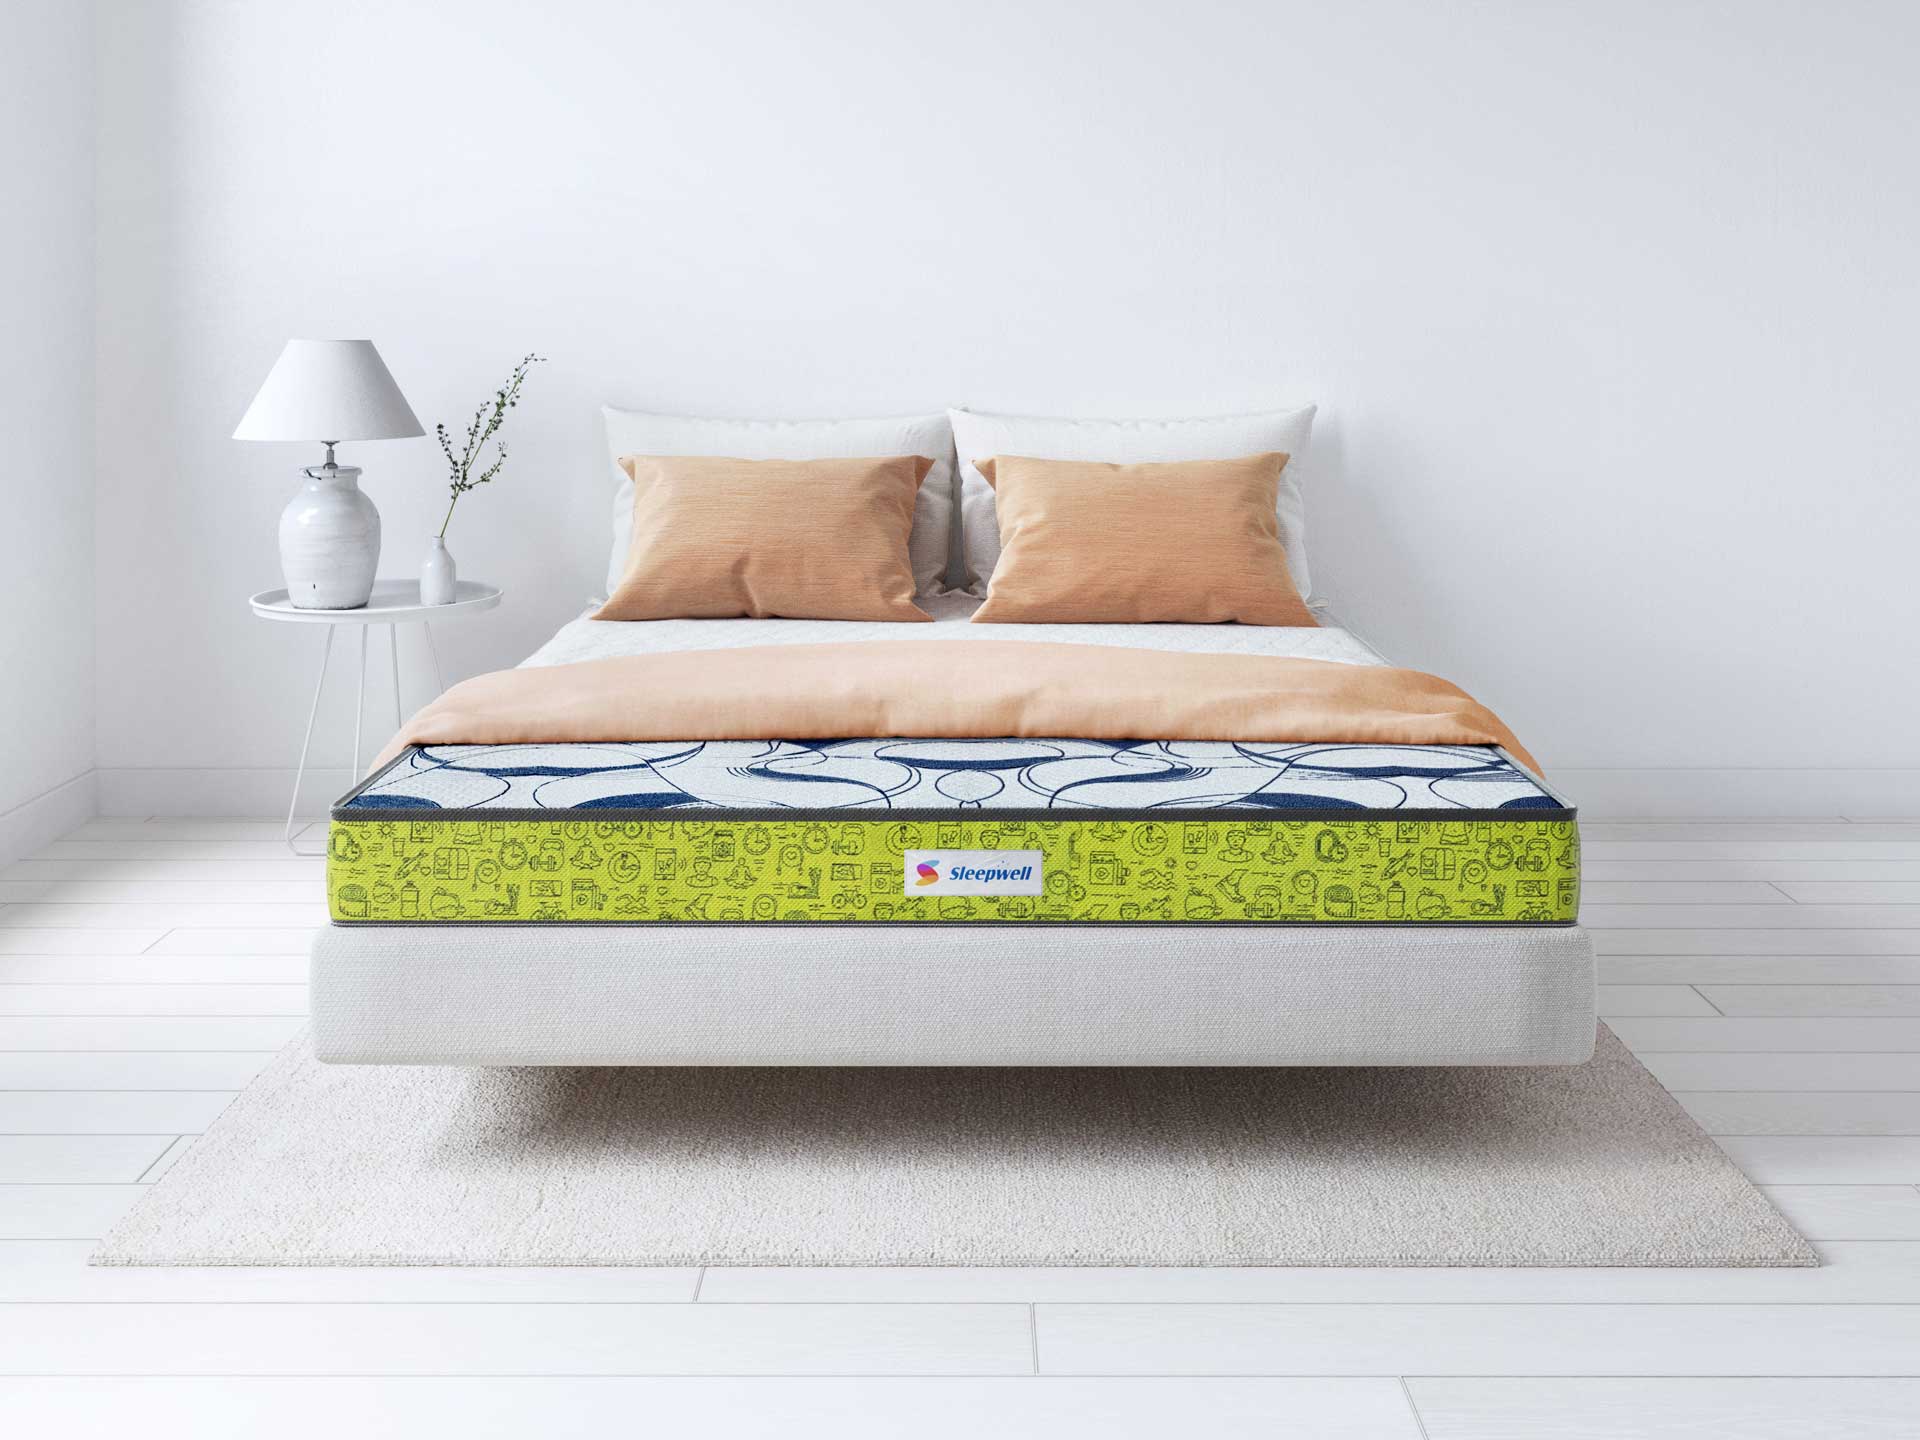 The Ultimate Guide To Buying The Best Mattress - Thesleepwellgallery